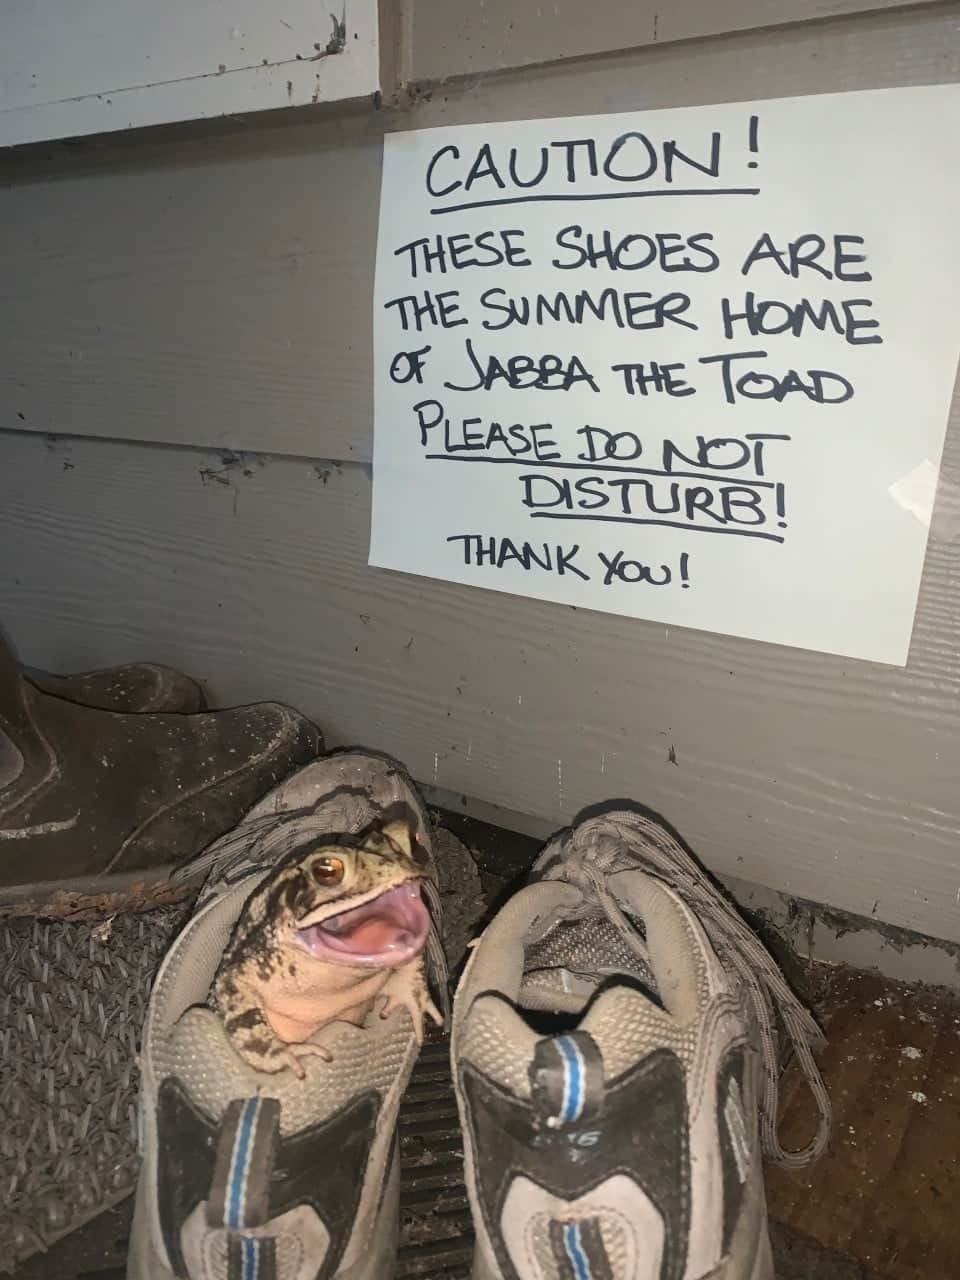 A toad inside one of two sneakers, with handwritten sign above: &quot;Caution: These shoes are the summer home of Jabba the Toad, PLEASE DO NOT DISTURB! Thank you&quot;